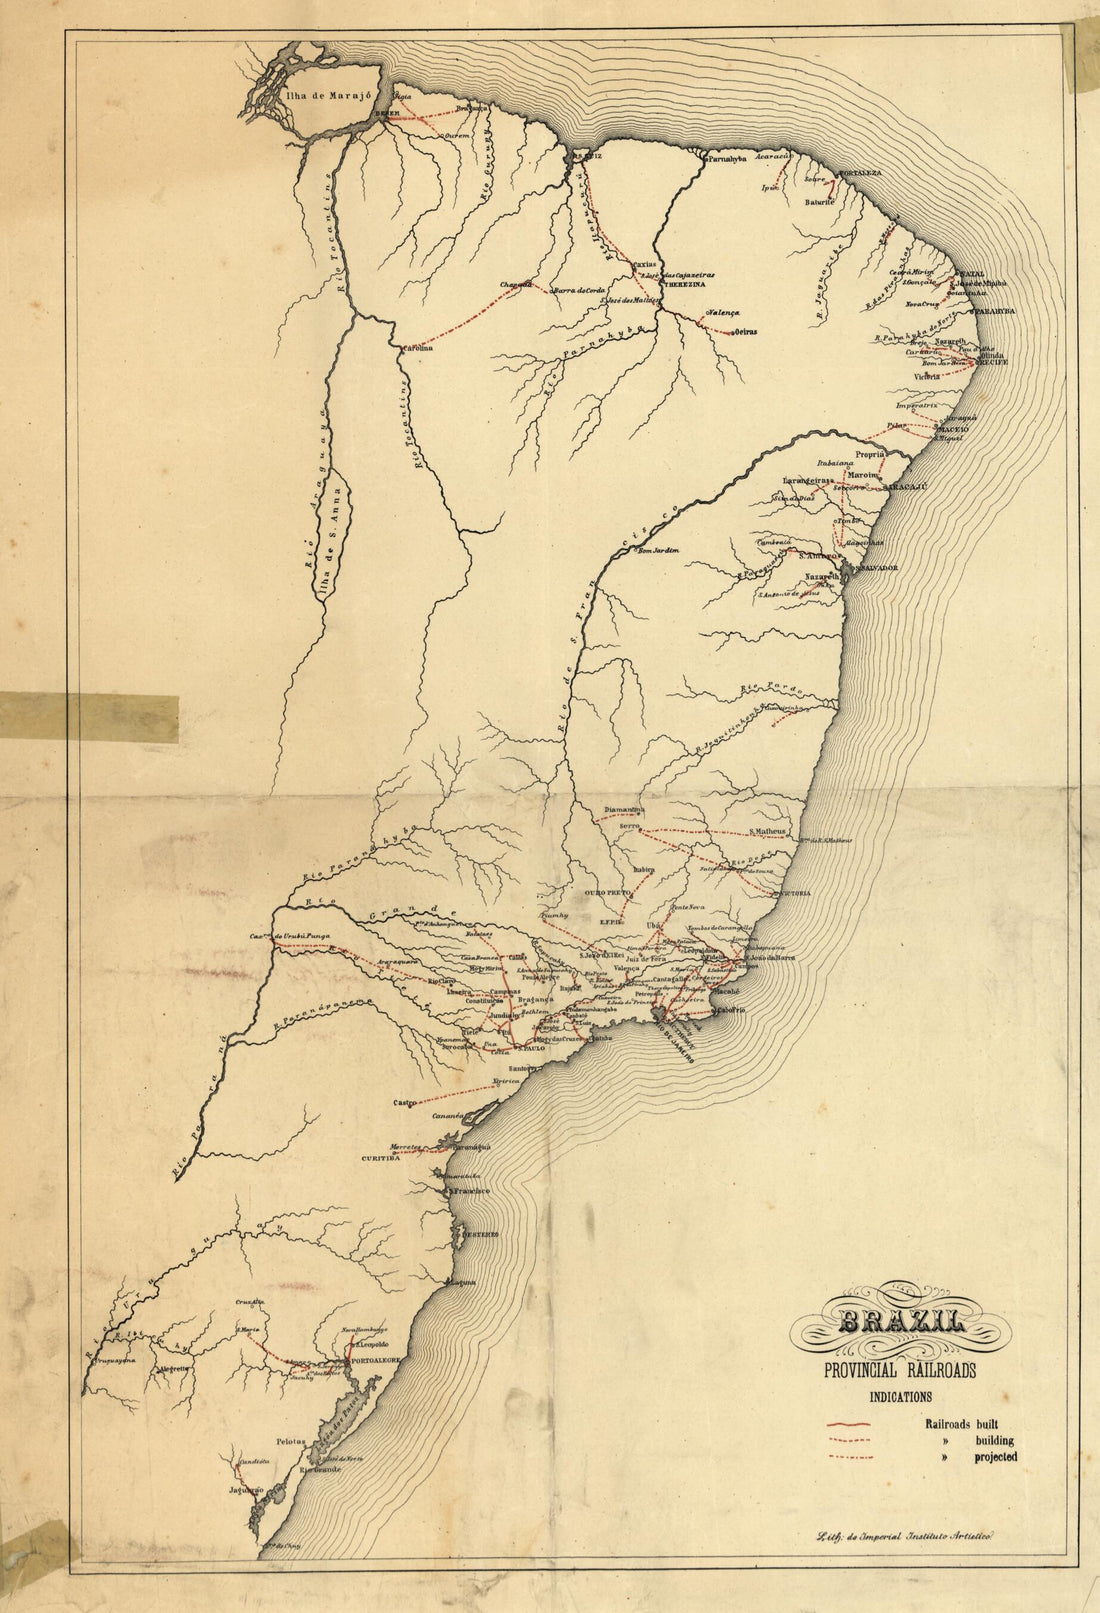 This old map of Brazil, Provincial Railroads from 1902 was created by Brazil) Imperial Instituto Artístico (Rio De Janeiro in 1902